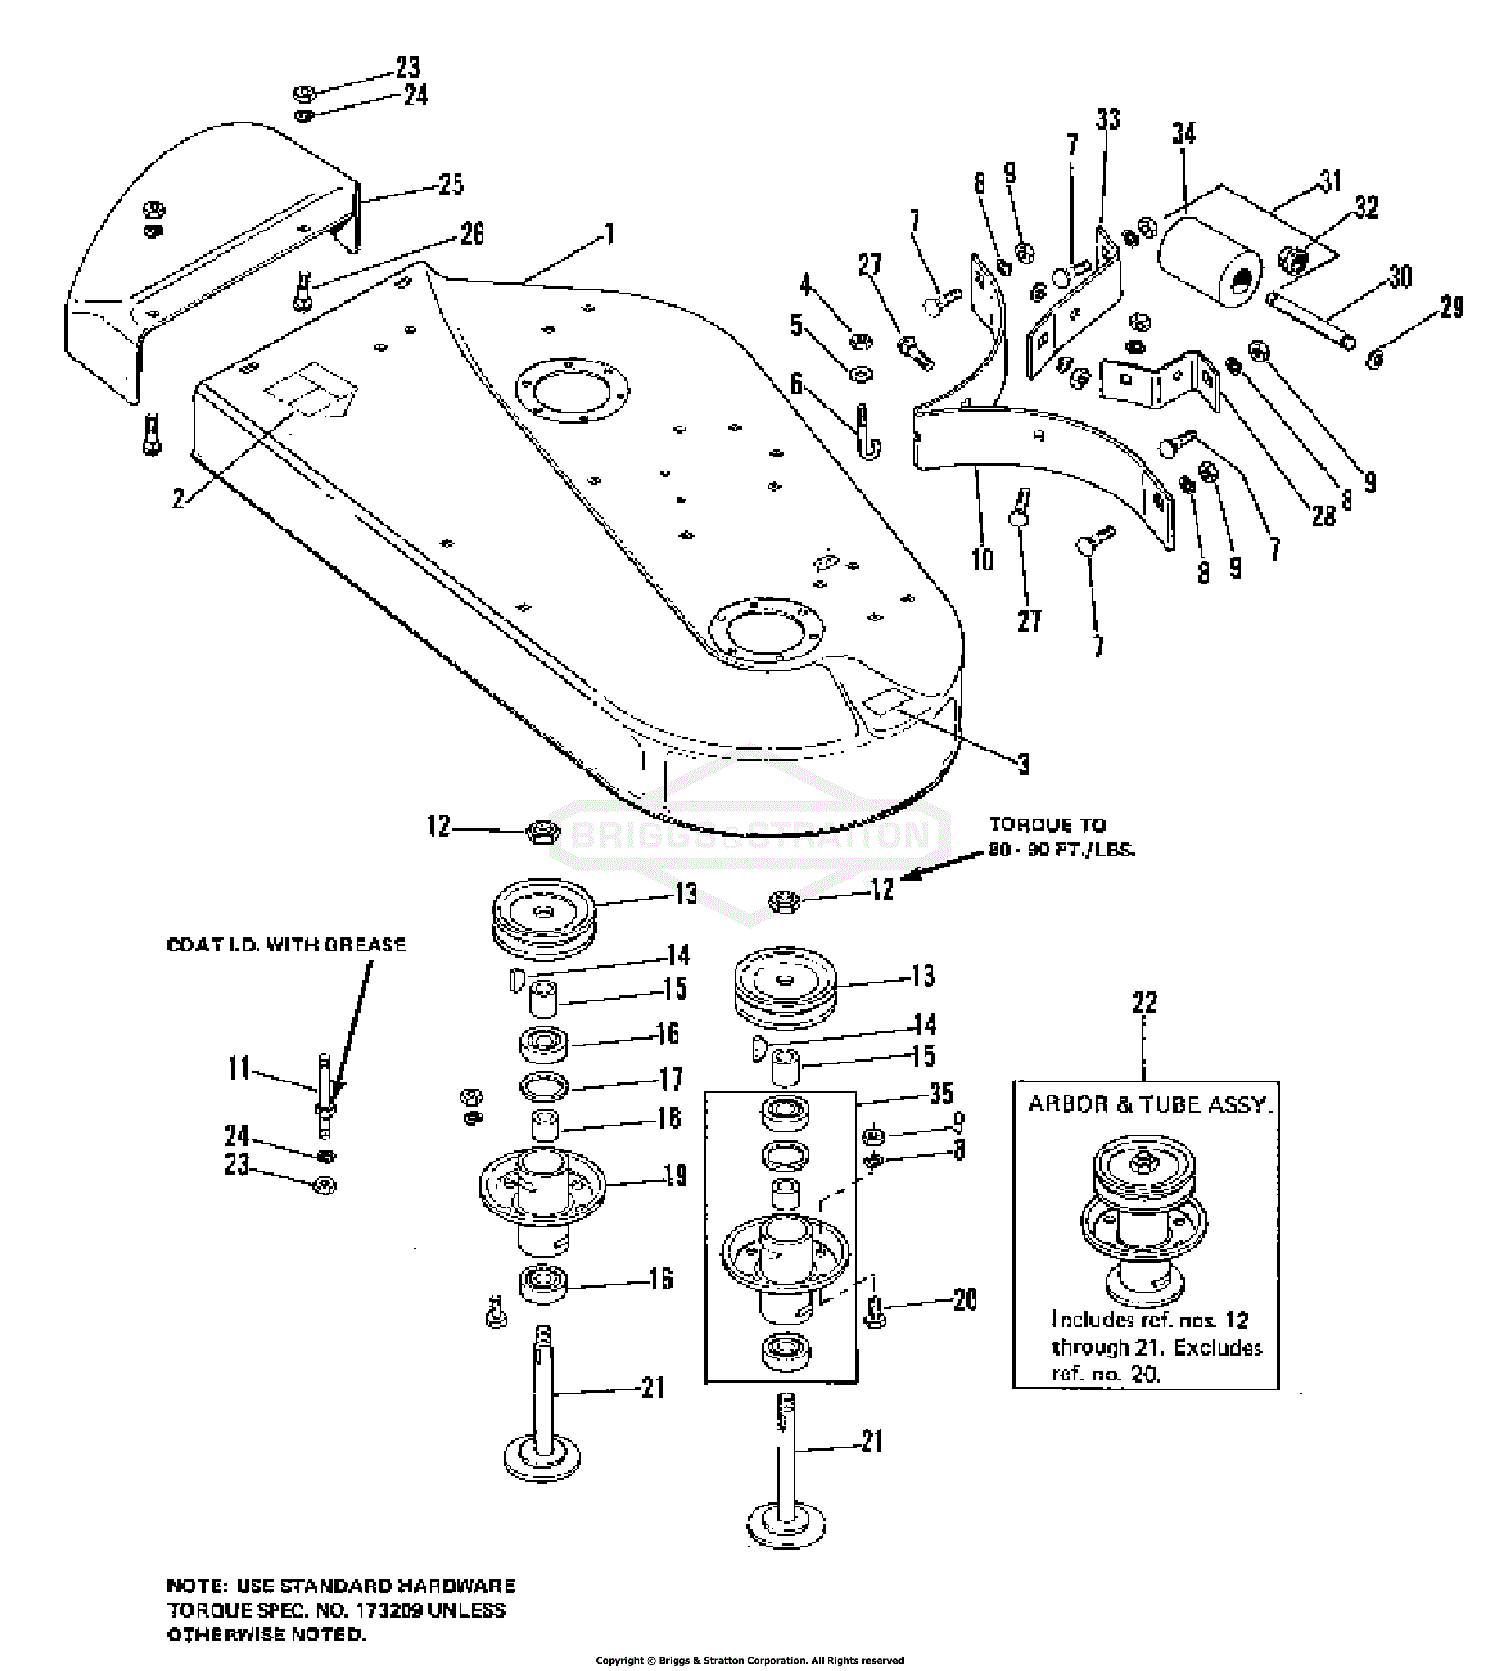 Simplicity 1690205 36 Rotary Mower Parts Diagram For Mower Deck And Arbors Group 0228i01